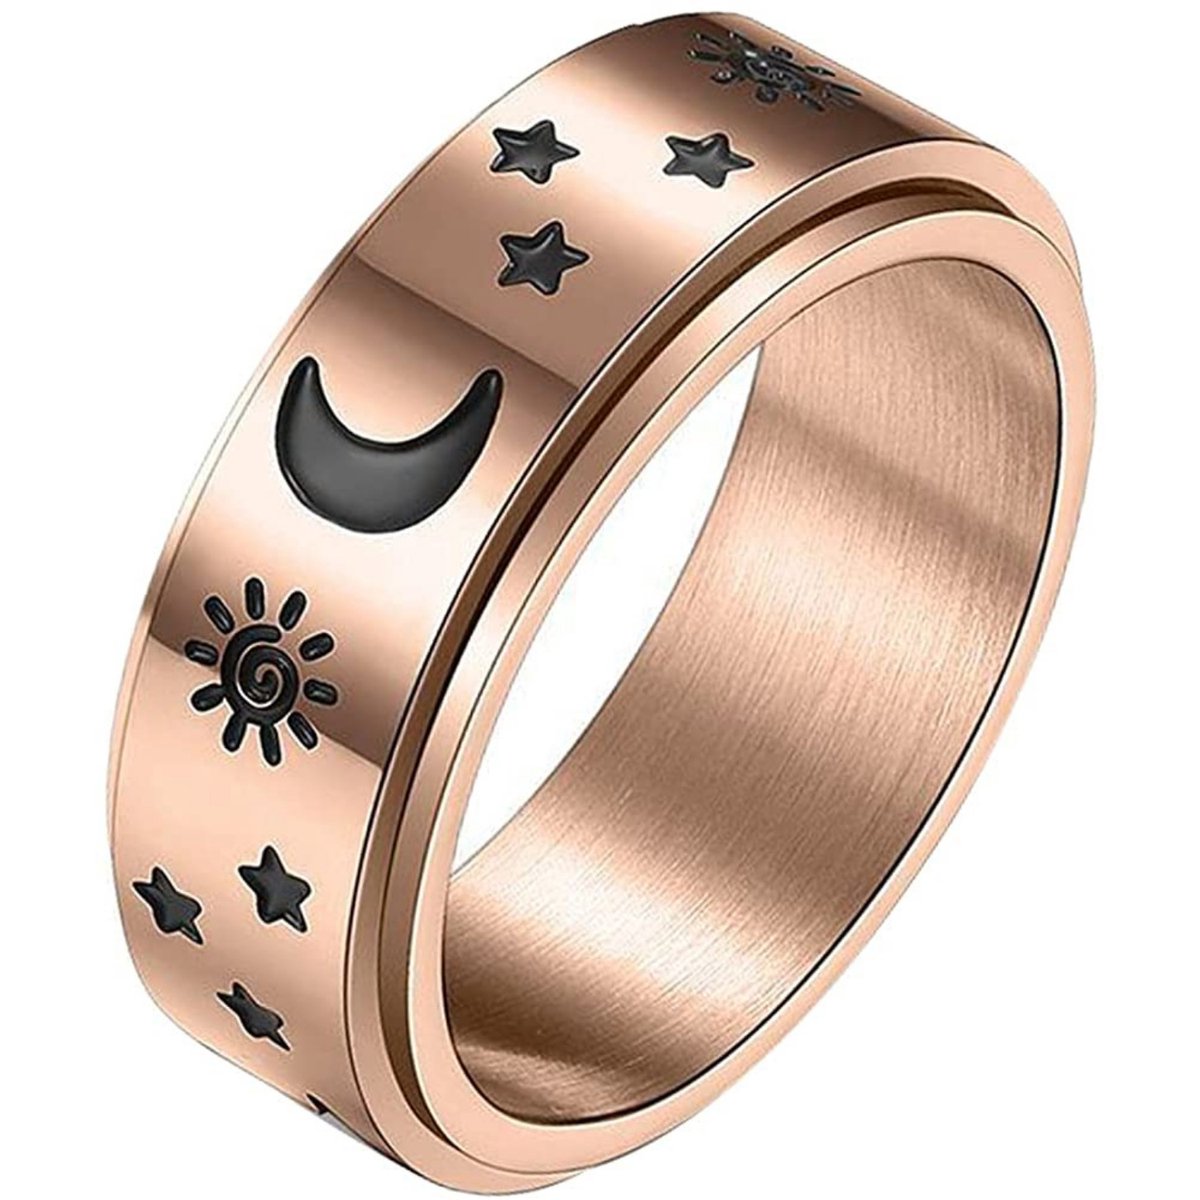 Anxiety Ring - (ster maan) - Stress Ring - Fidget Ring - Draaibare Ring - Angst Ring - Spinner Ring - Koper Plated - (16.50 mm / maat 52)